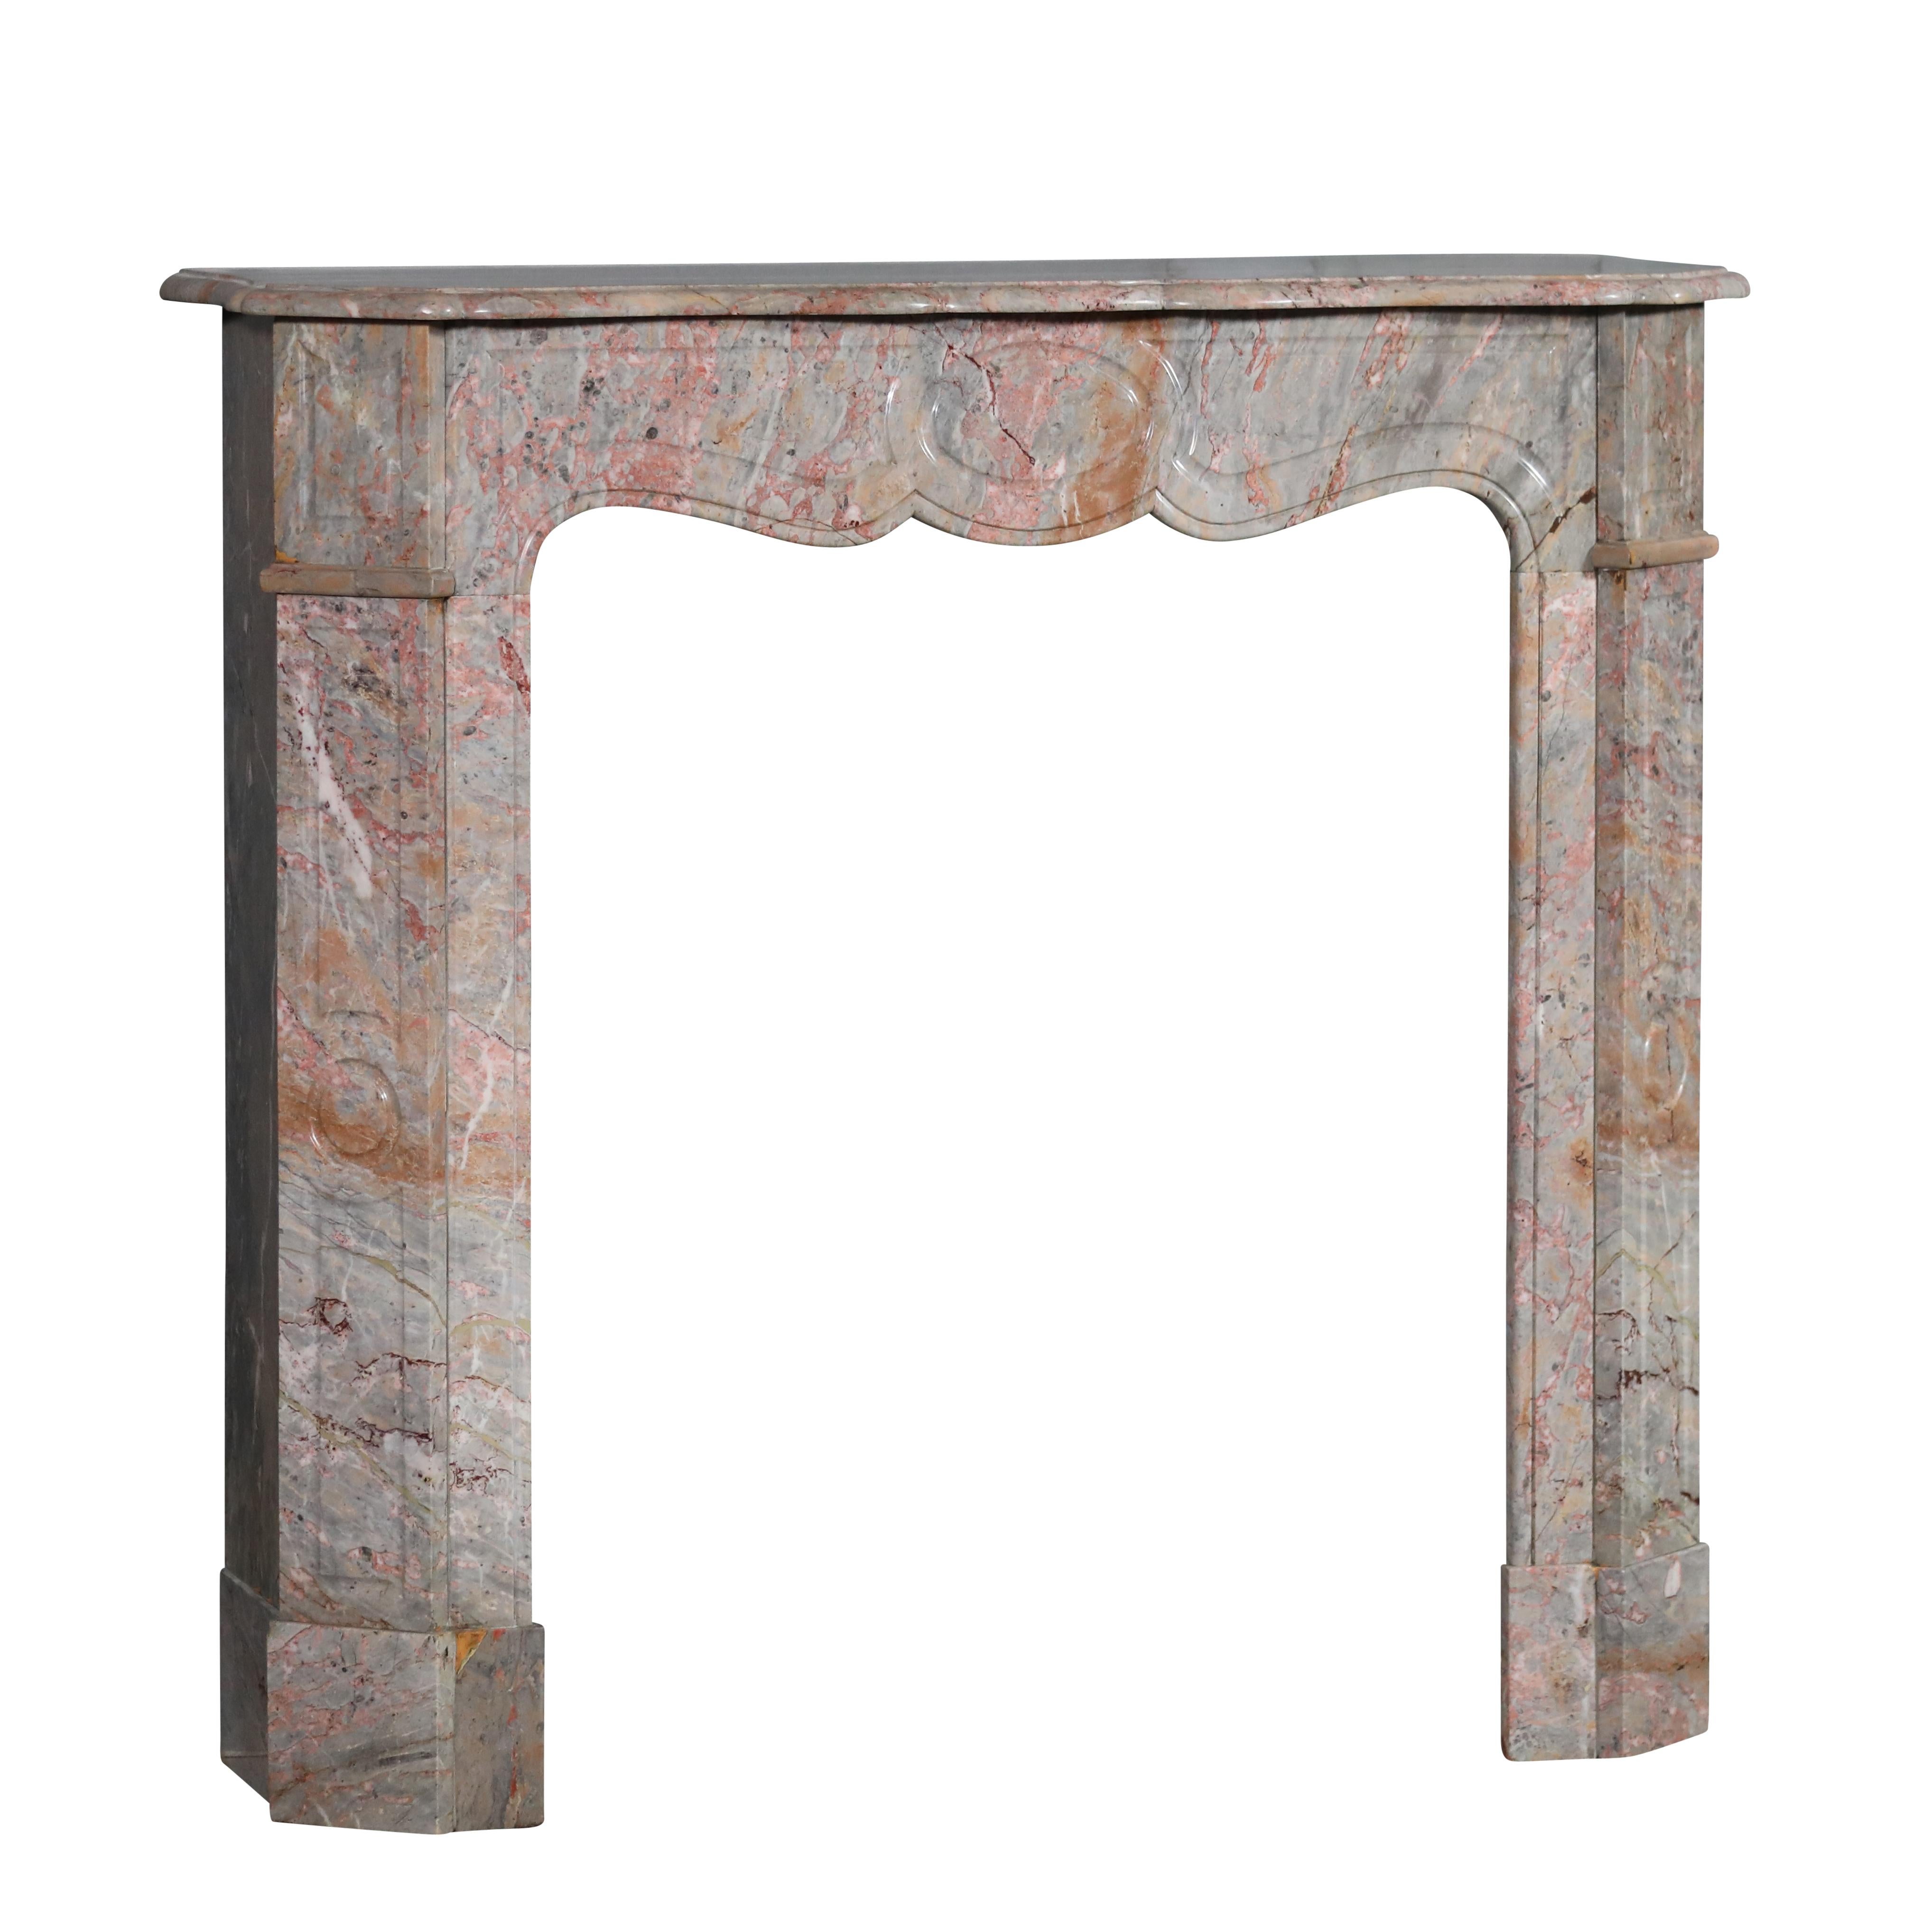 French Parisian Pompadour Pink Marble Fireplace Surround From Paris For Sale